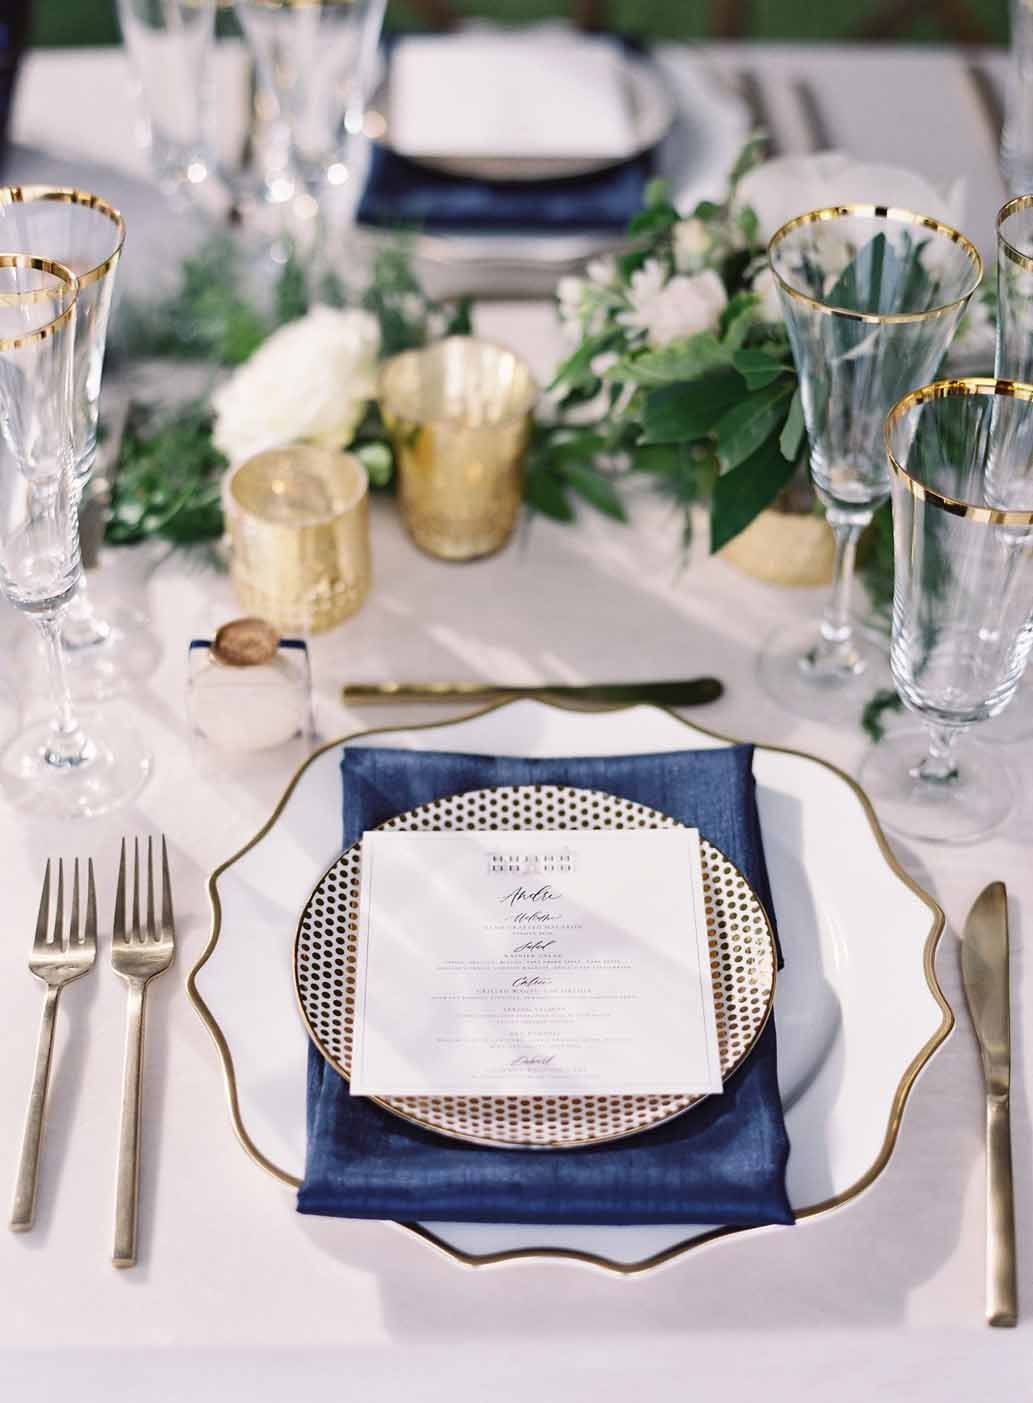 place setting for wedding with gold rimmed plates, gold flatware, navy napkin, gold votives, and greenery centerpiece